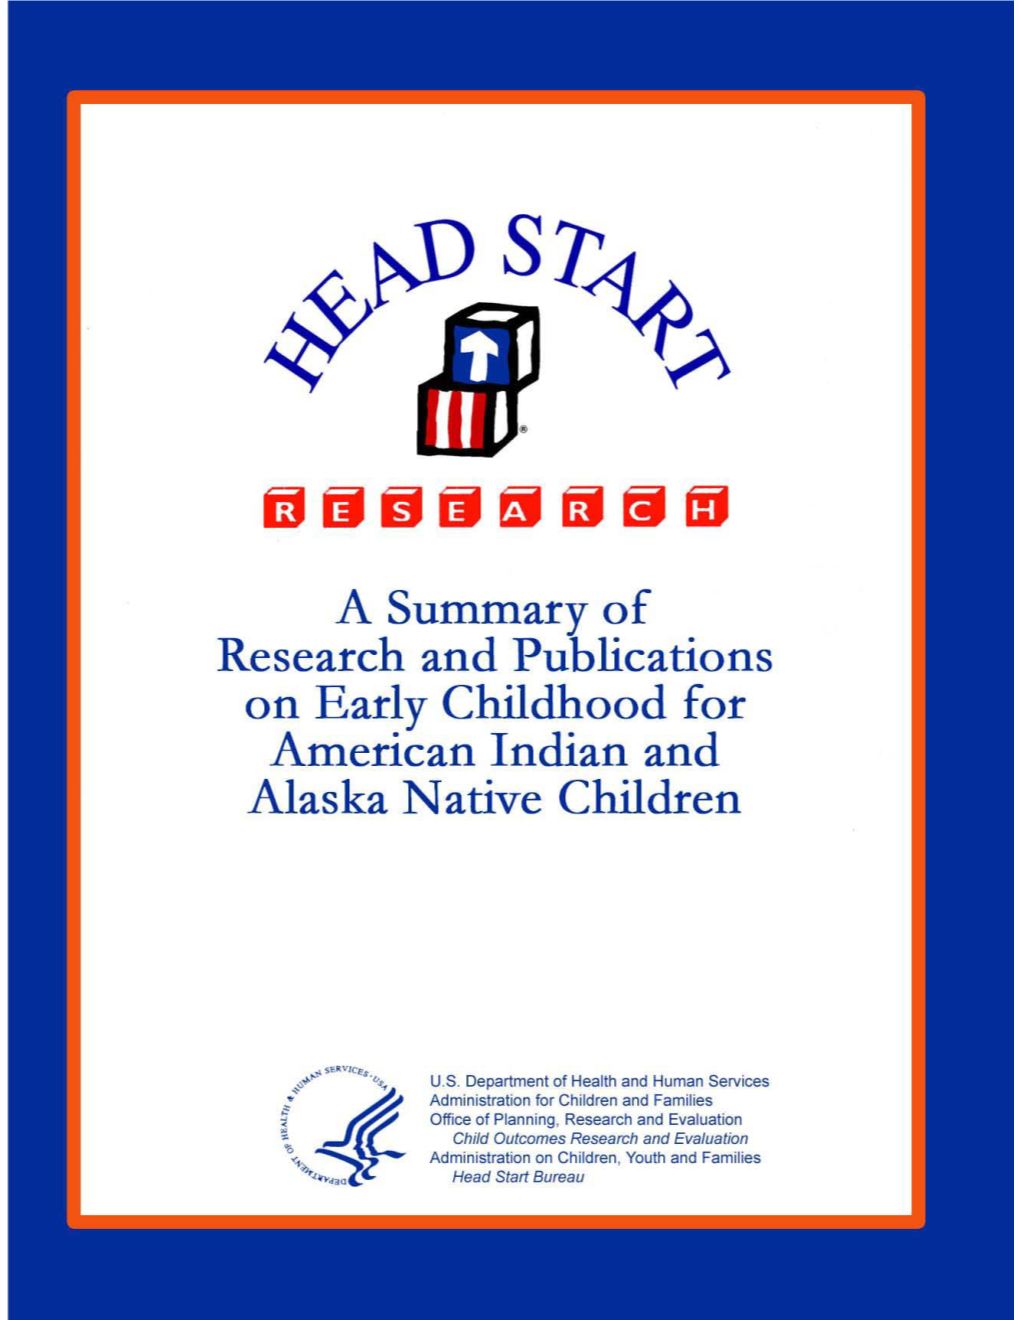 A Summary of Research and Publications on Early Childhood for American Indian and Alaska Native Children